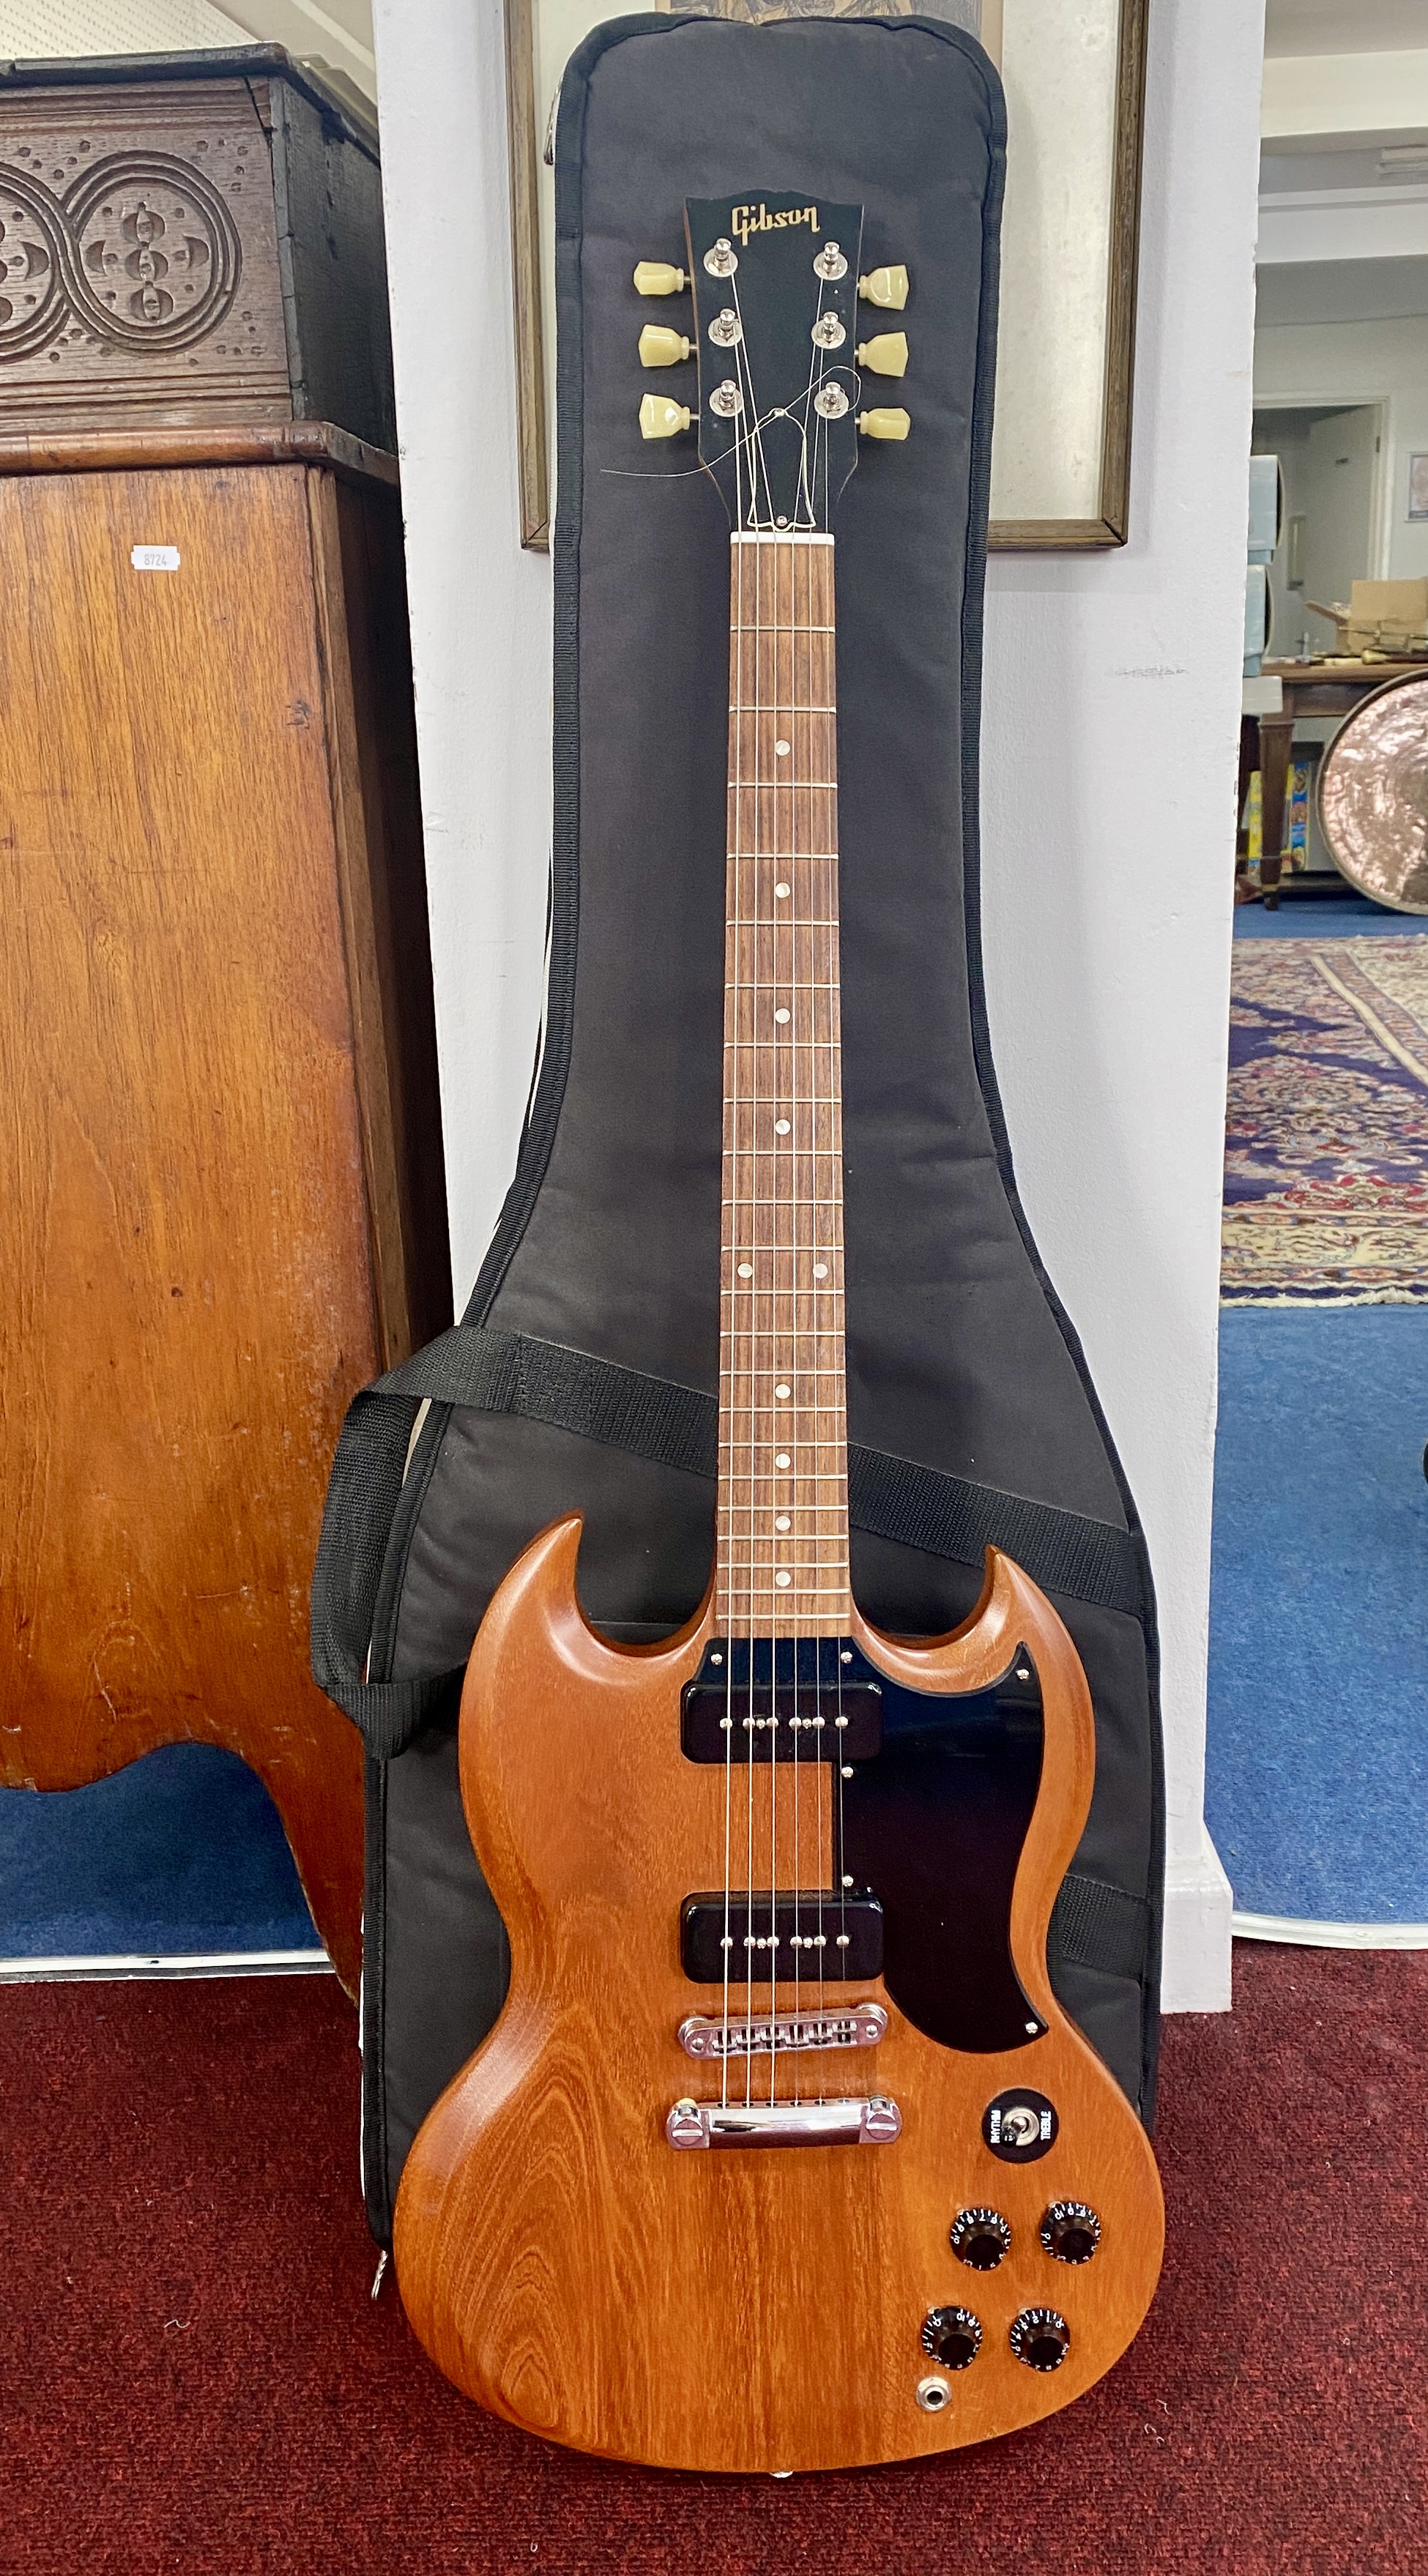 A Gibson USA electric guitar with rhythm and treble impressed mark 108220596 circa 2012 with carry